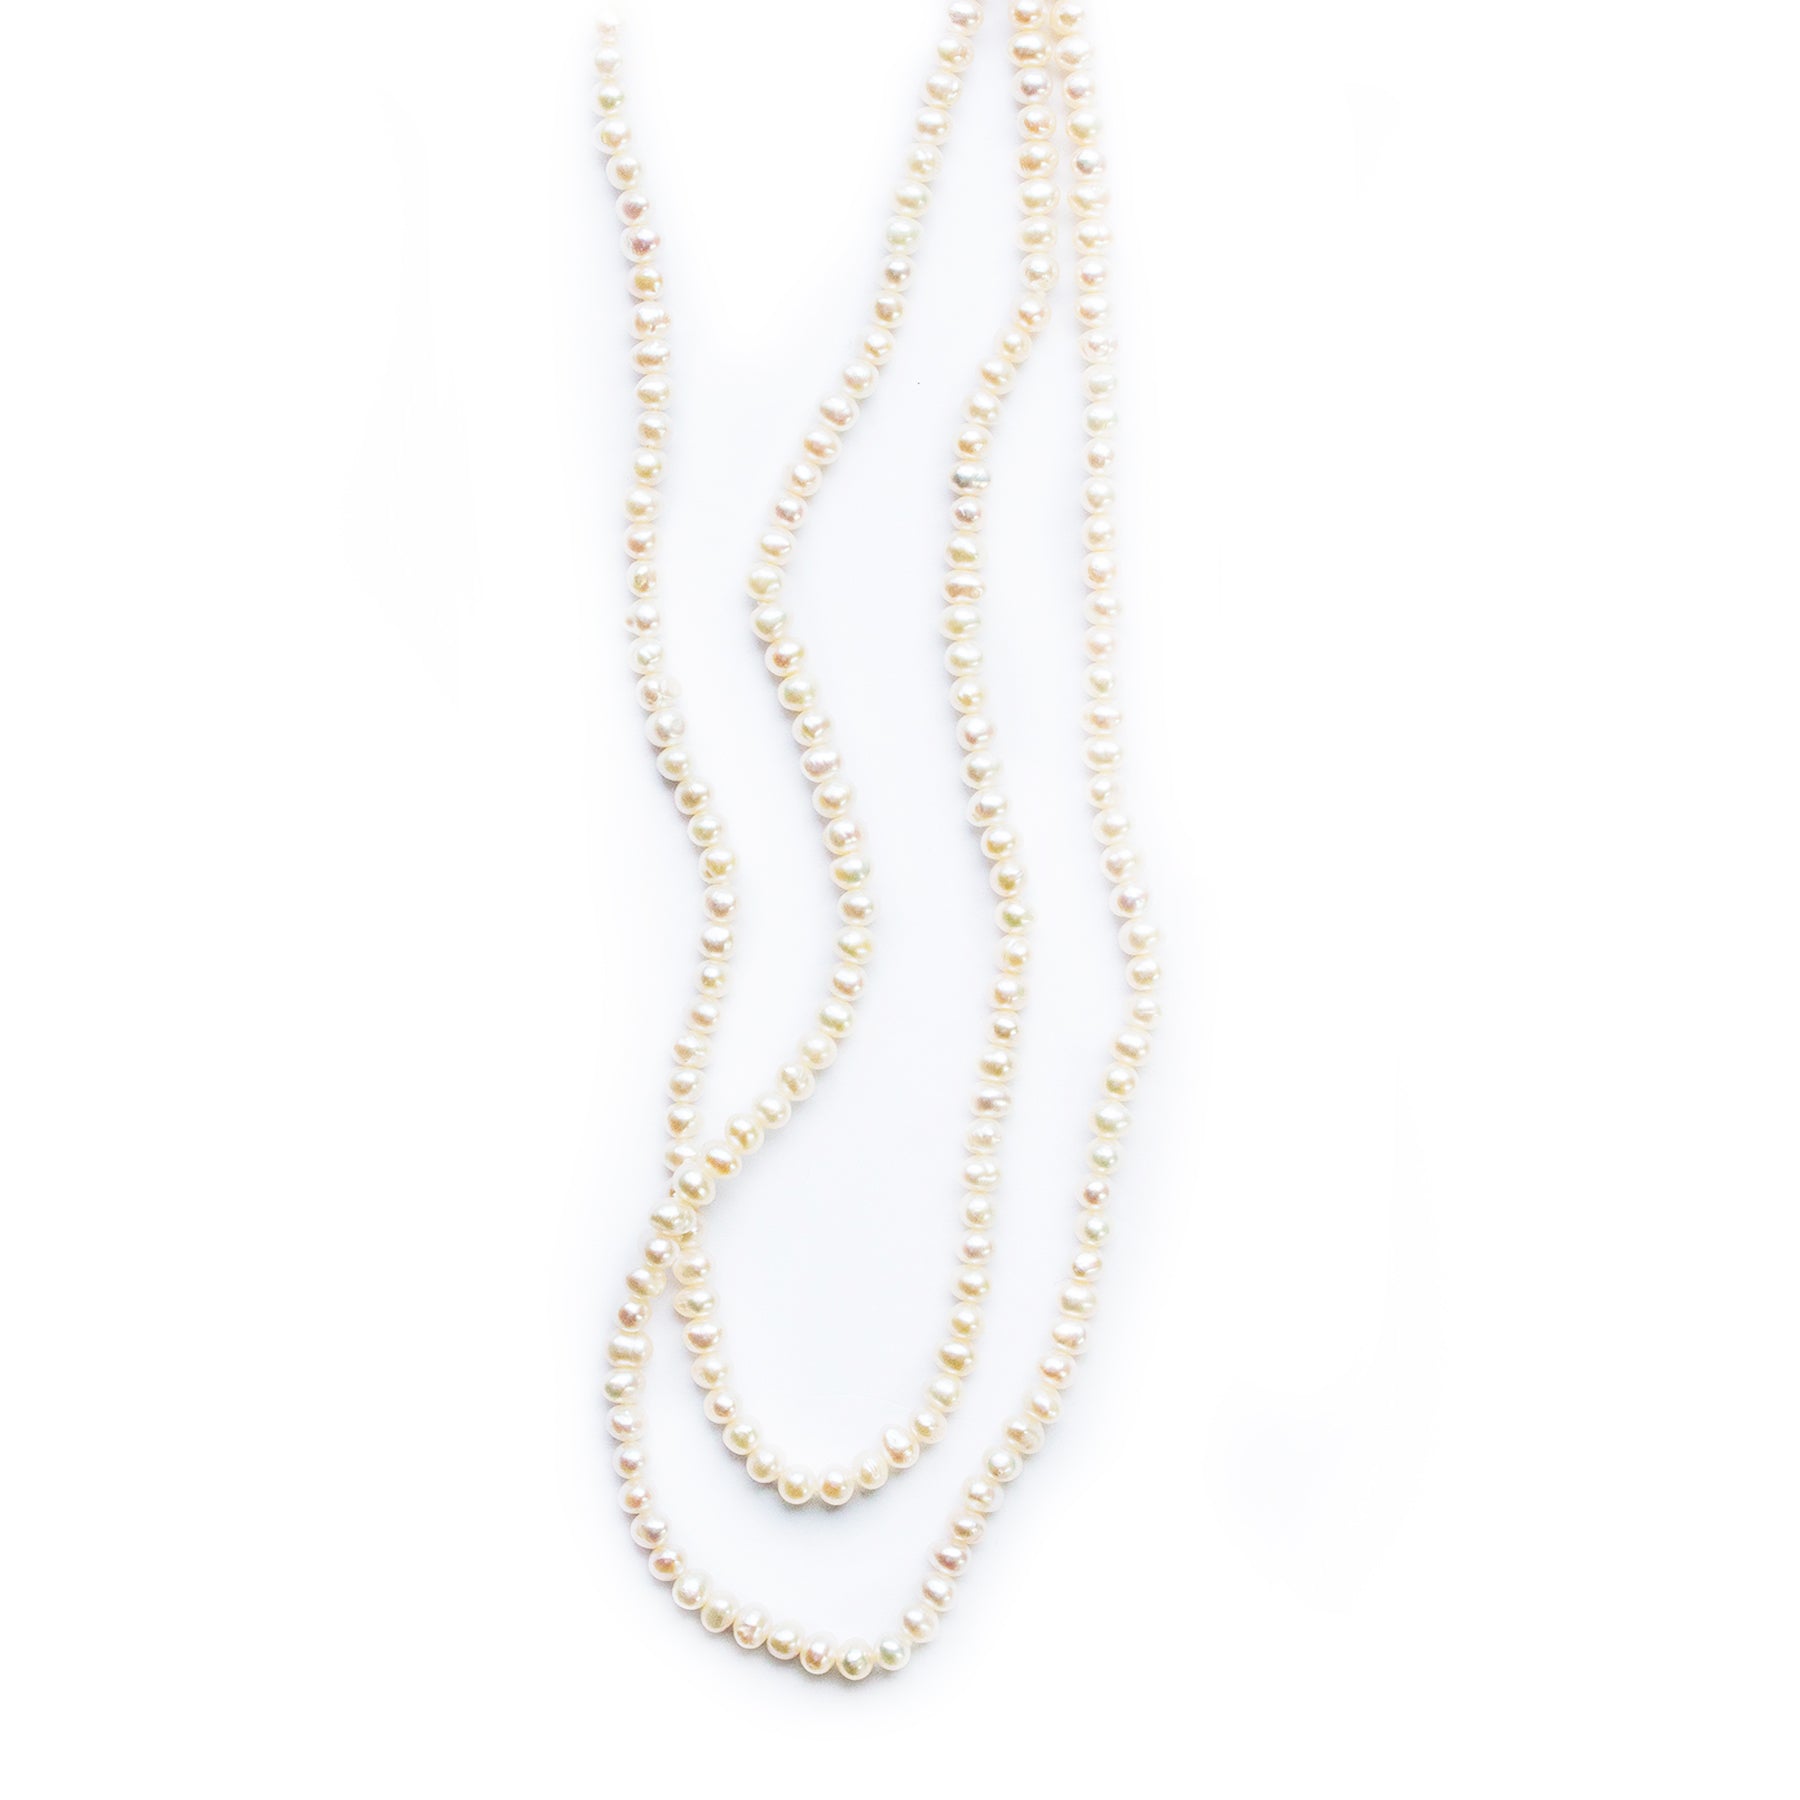 Freshwater Pearl Necklace, 42”